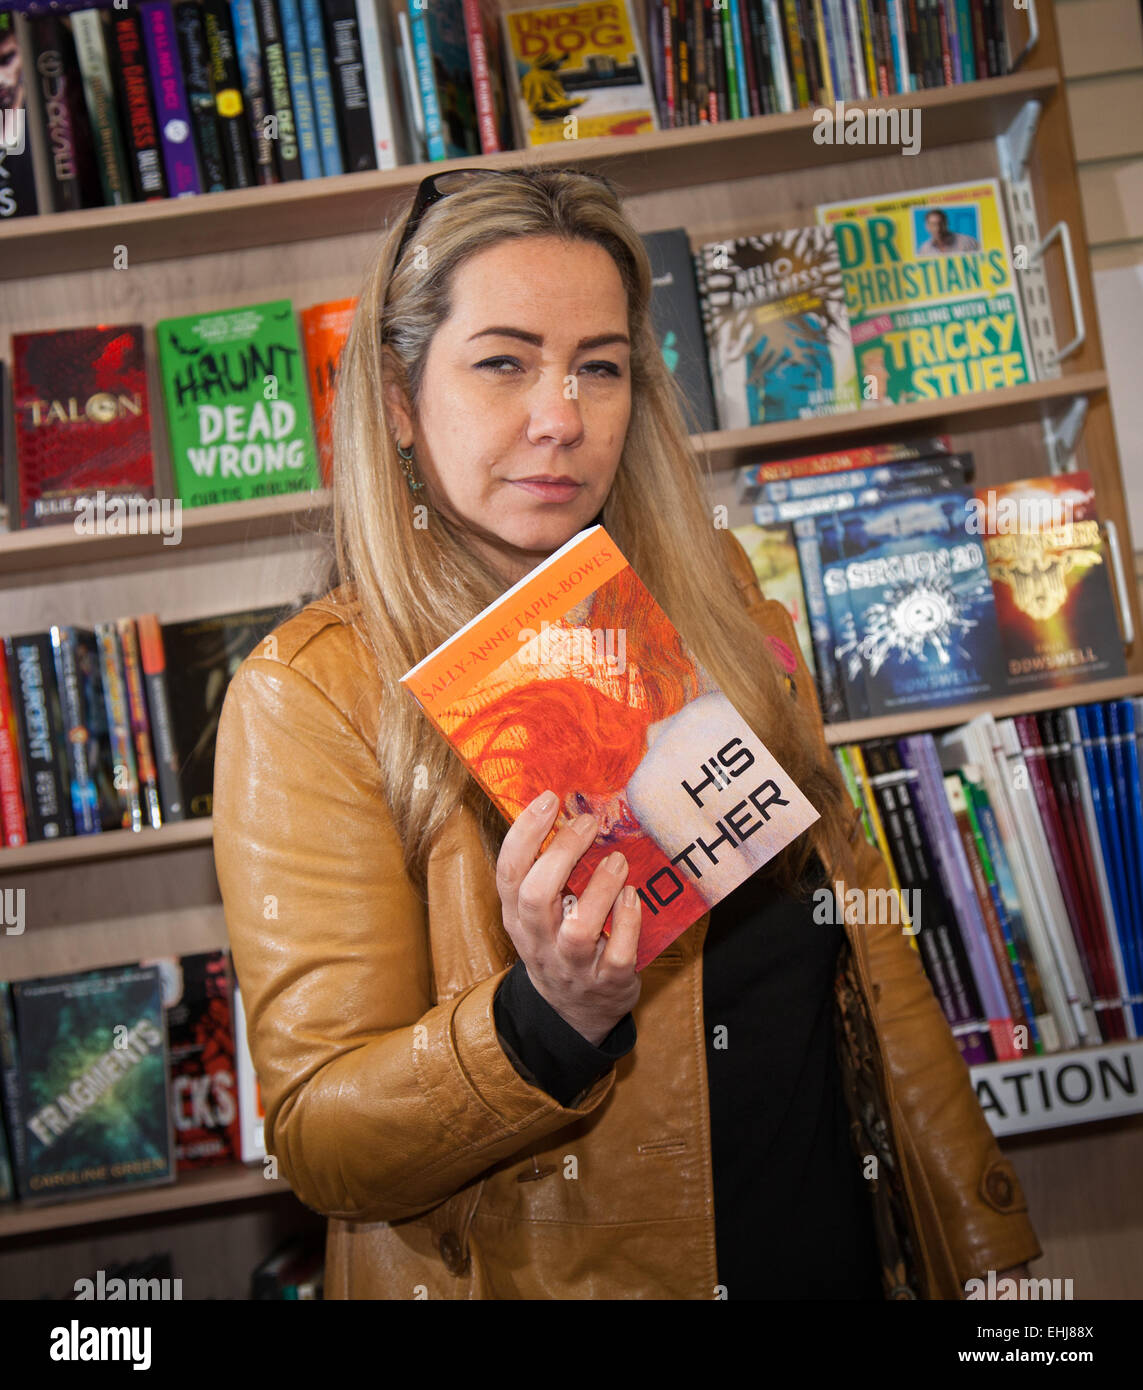 Formby, Southport, Merseyside UK. 14th March, 2015. Sally-Anne Tapia-Bowes book signing at Formby Books. Sally-Anne Tapia-Bowes graduated at Hope University with a degree in English Literature and Contemporary Art. She is a past employee of Pearson Edexcel having worked as a Principal Examiner for G.C.S.E. English Literature and Chief Examiner for I.G.C.S.E. English Literature.  HIS MOTHER is her debut crime novel with sequels HER FATHER and THEIR PARENTS to follow. Themes in this series include dysfunctional families, mental health, loss and regret. Stock Photo